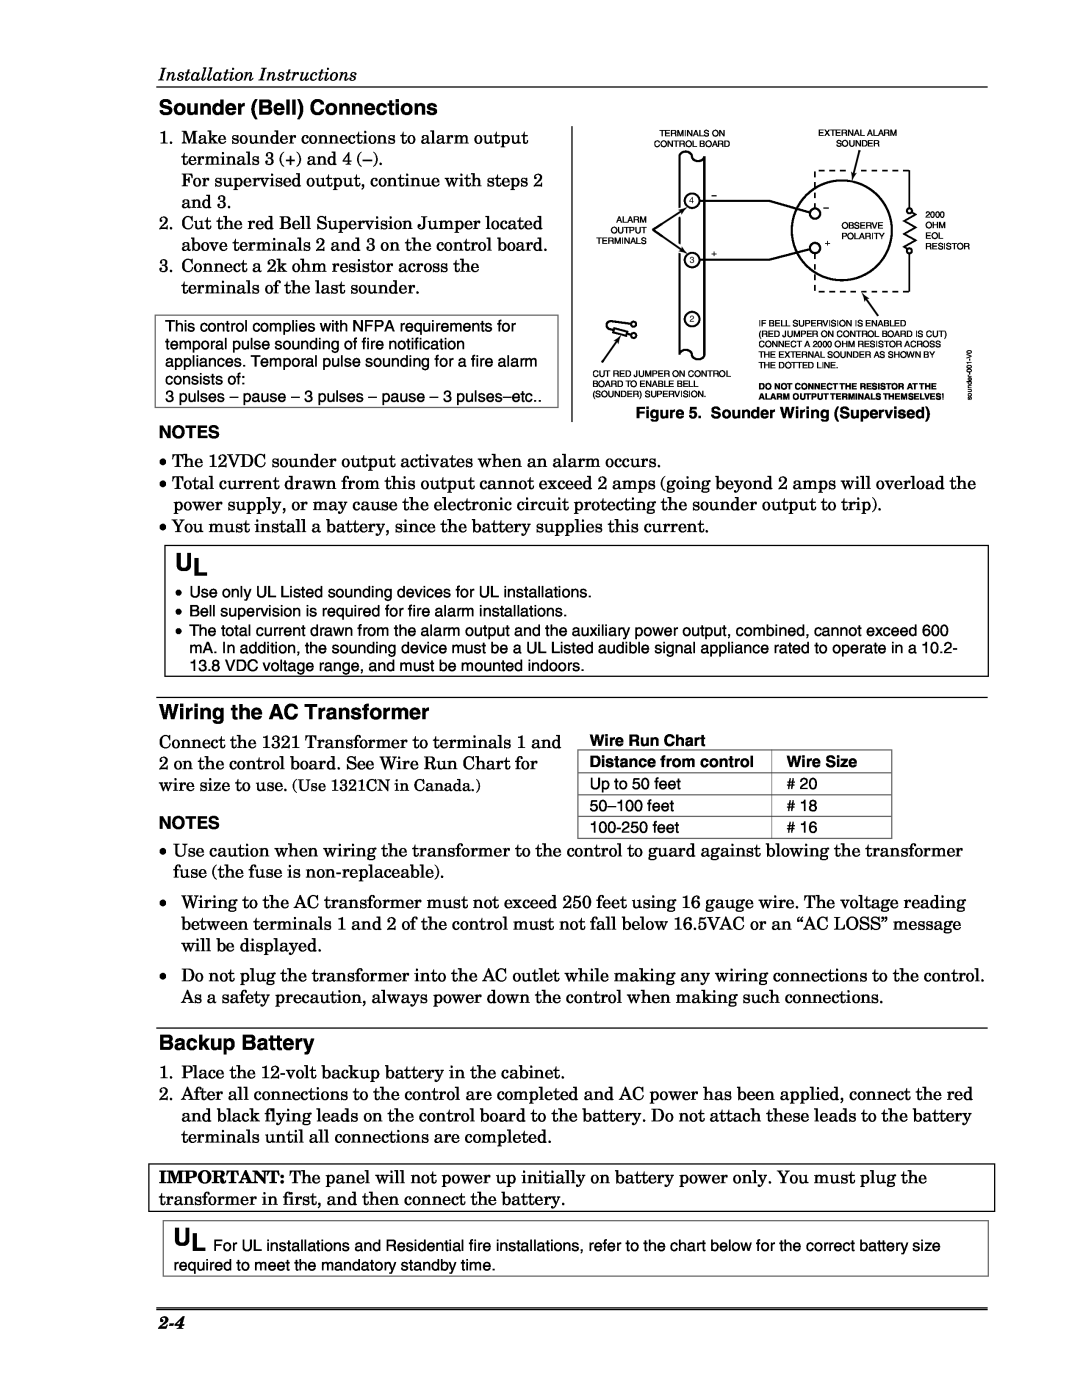 Honeywell VISTA-10PSIA Sounder Bell Connections, Wiring the AC Transformer, Backup Battery, Installation Instructions 